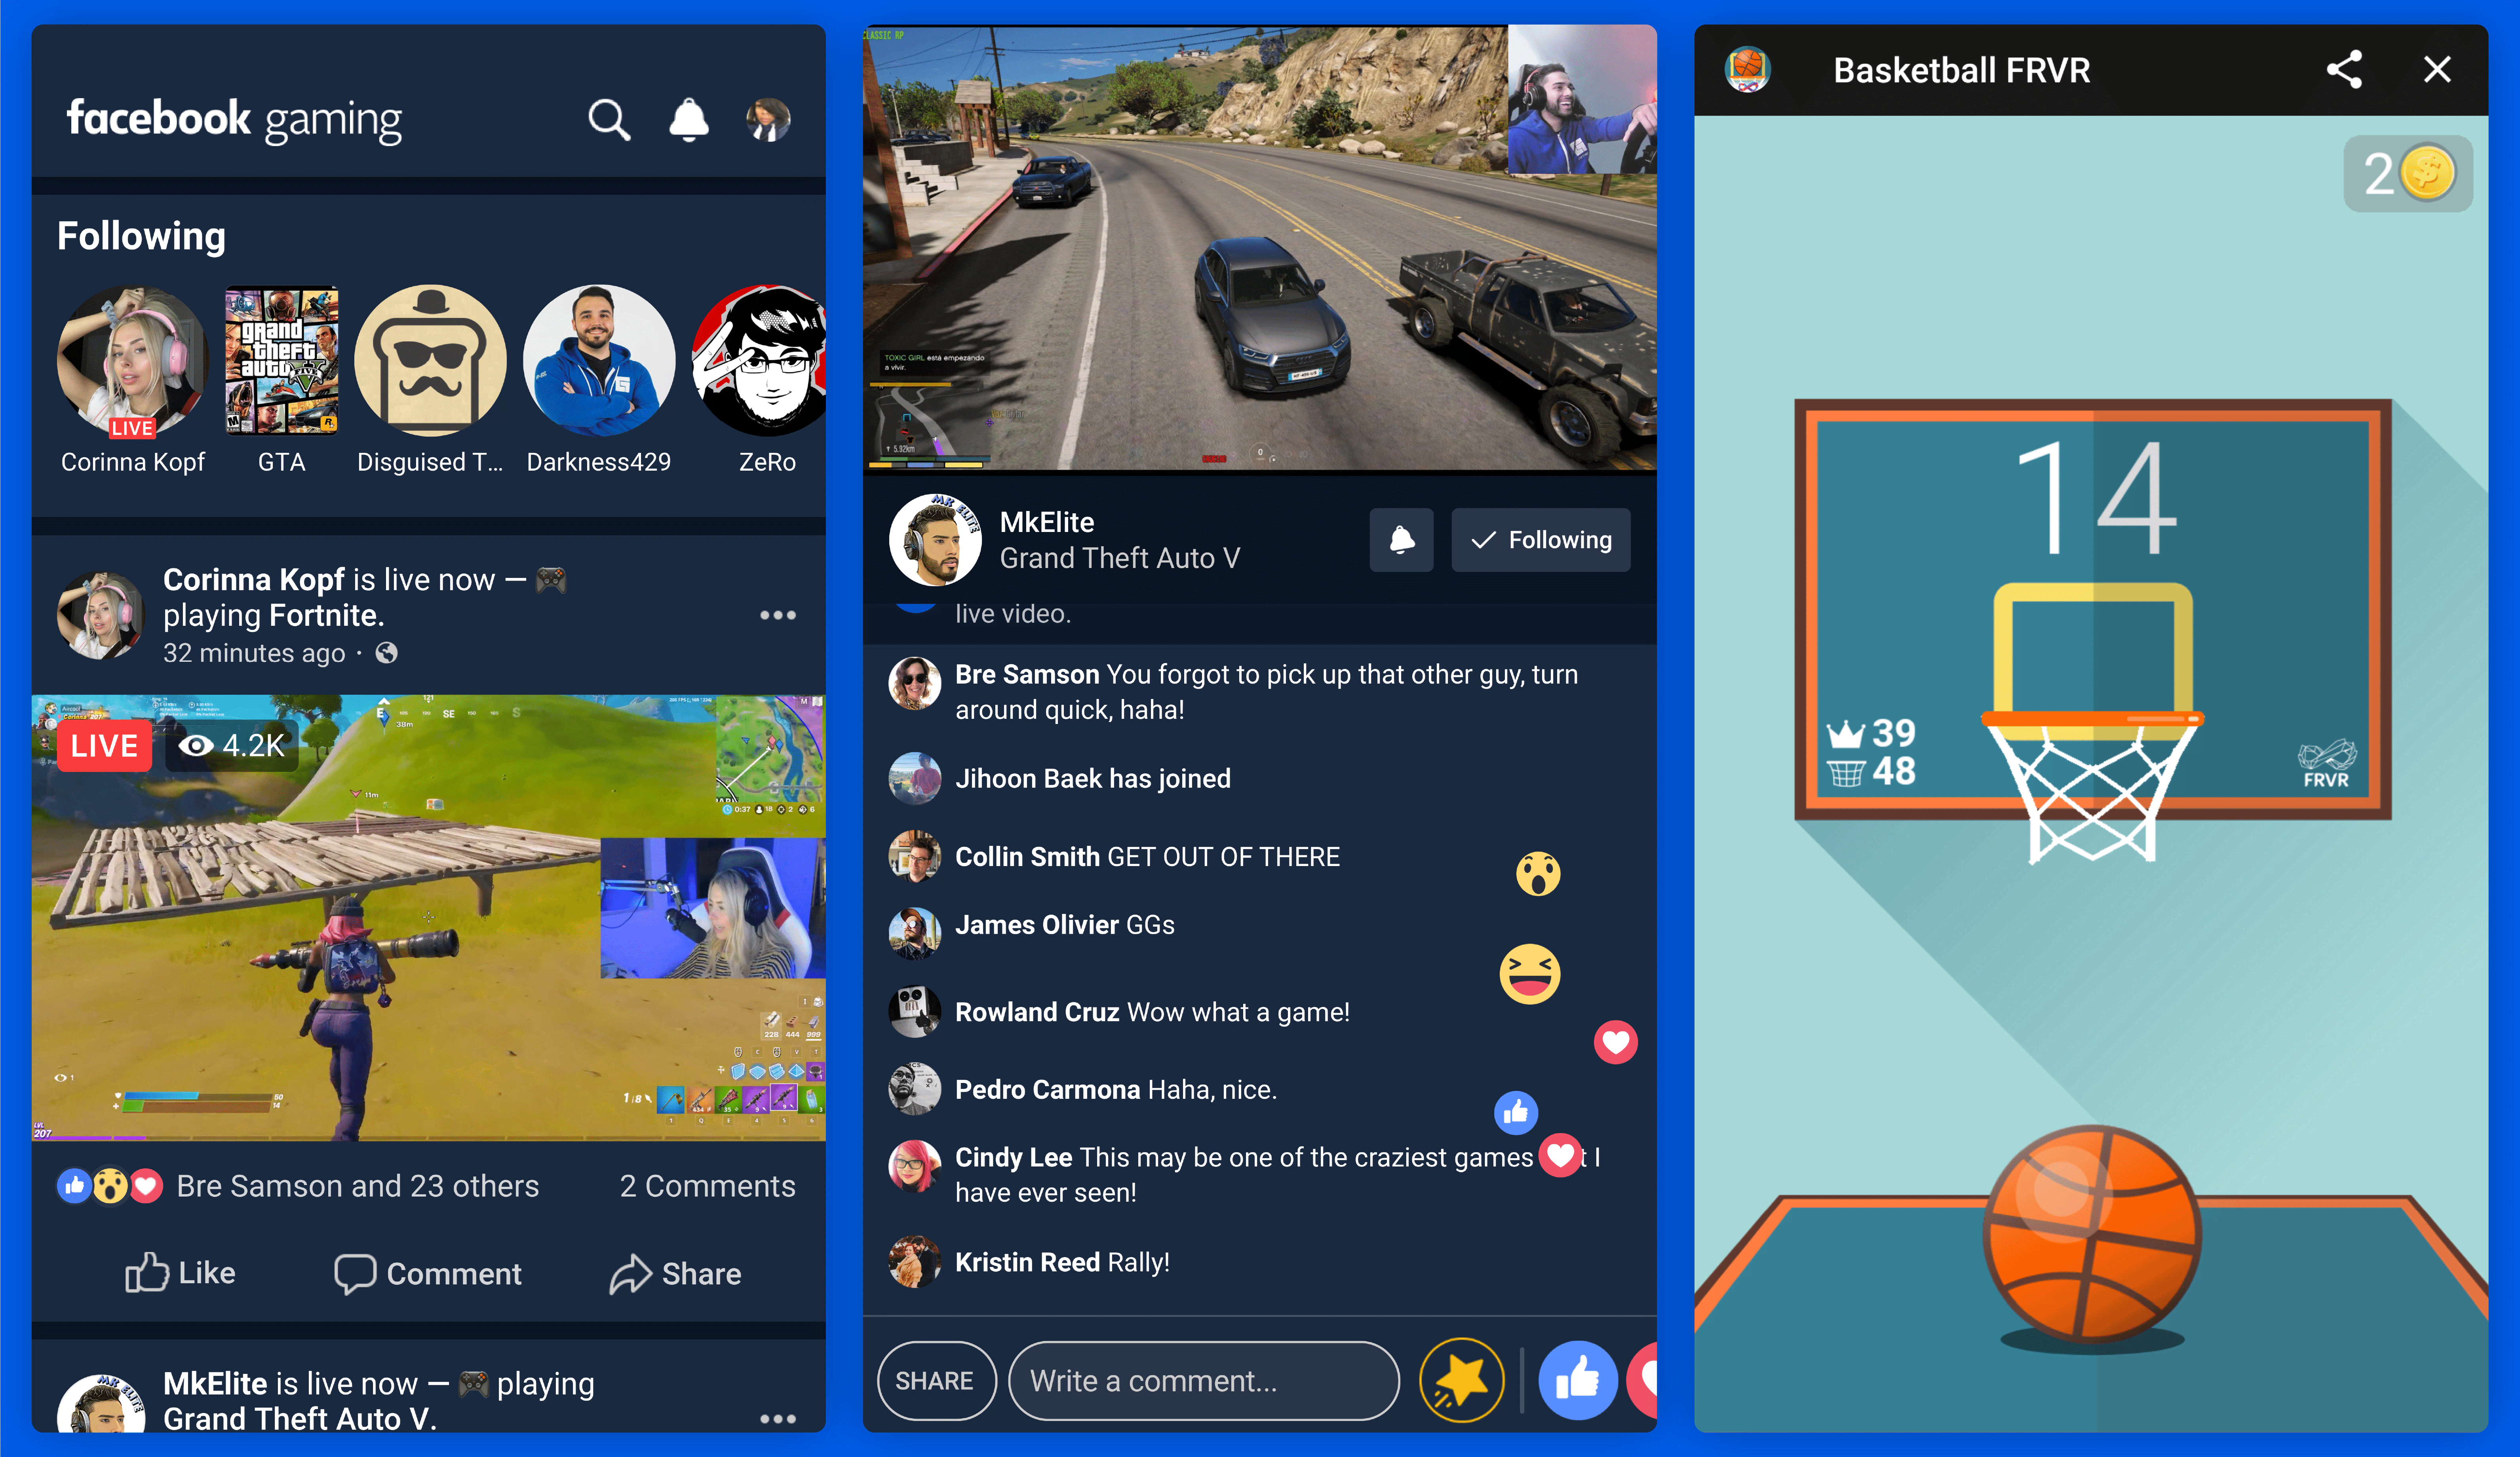 Facebook launches dedicated gaming app to take on Twitch and YouTube